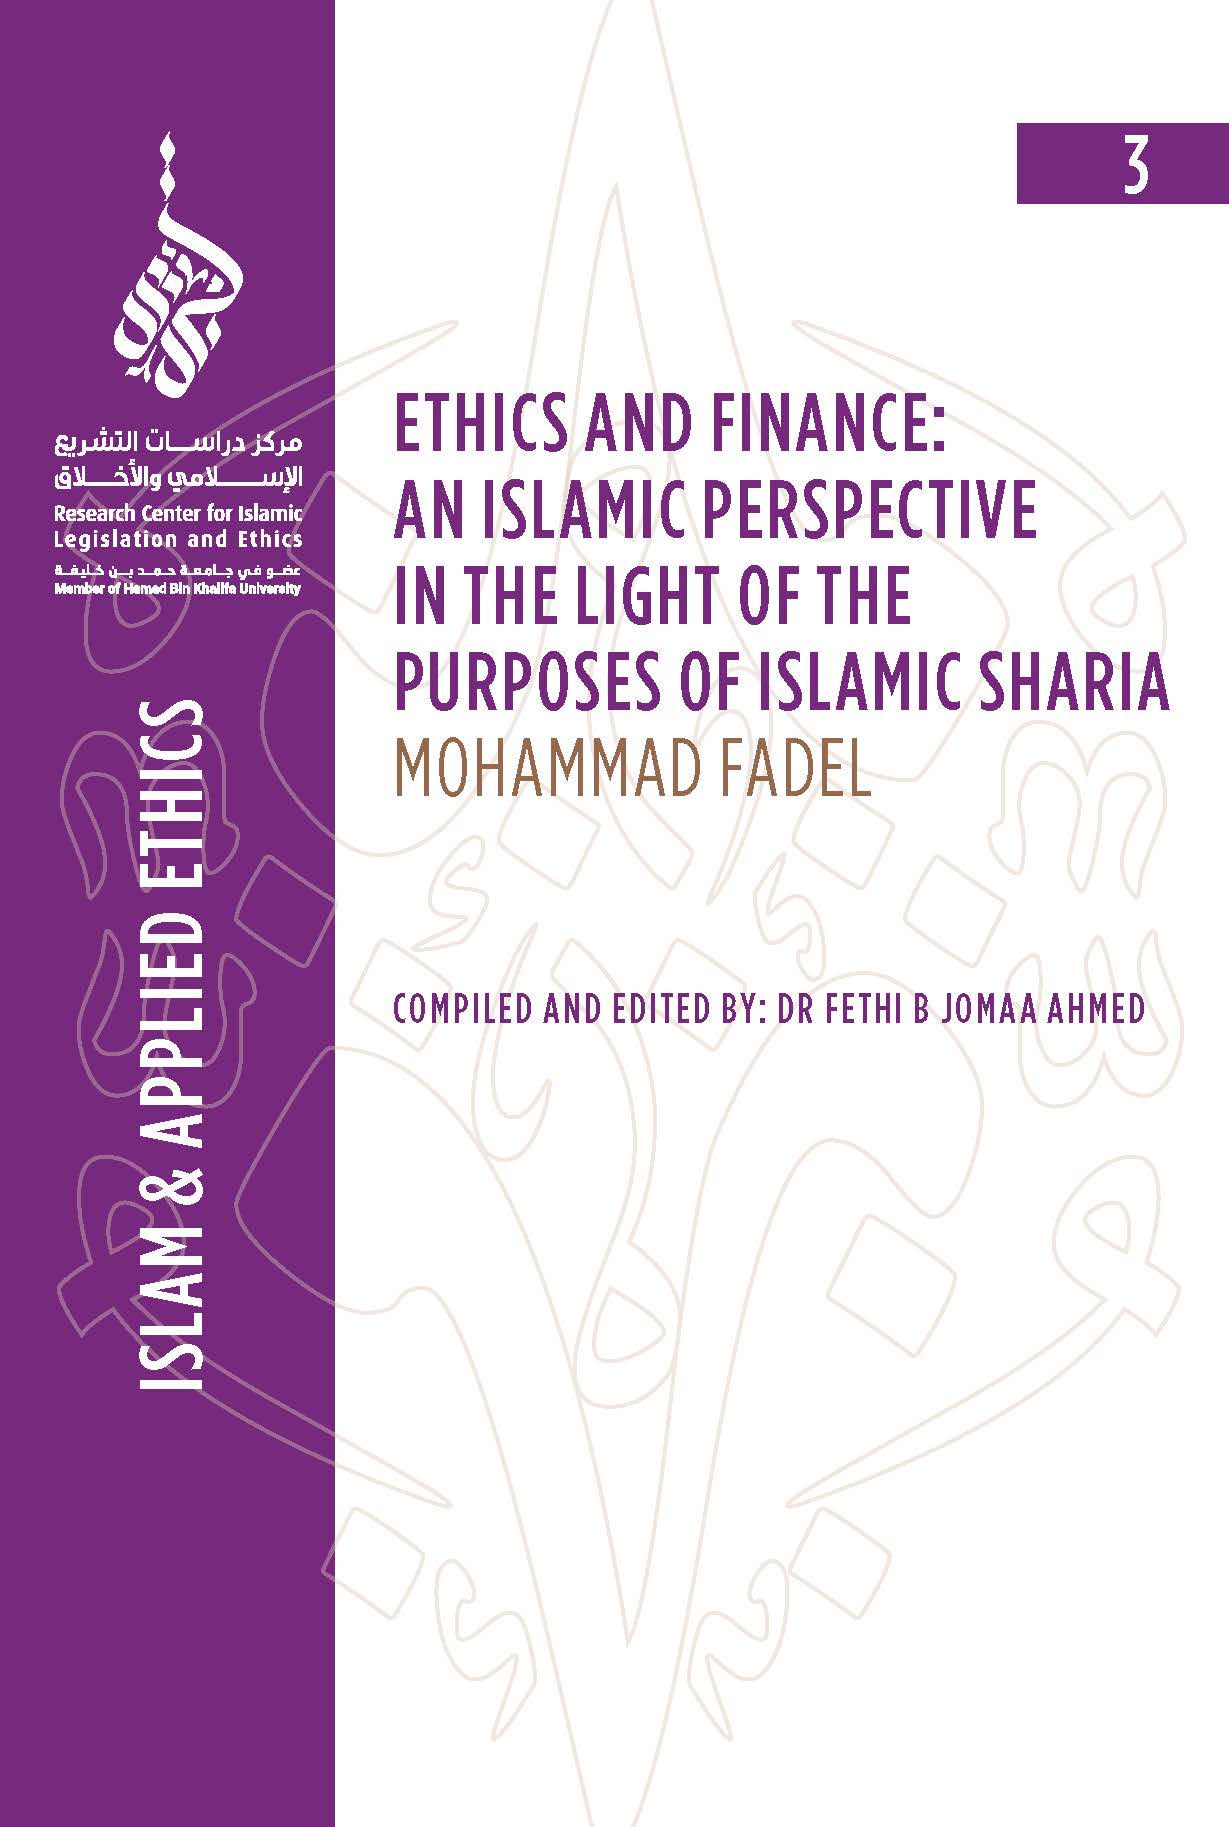 Ethics and Finance: an Islamic Perspective in the Light of the Purposes of Islamic Sharia